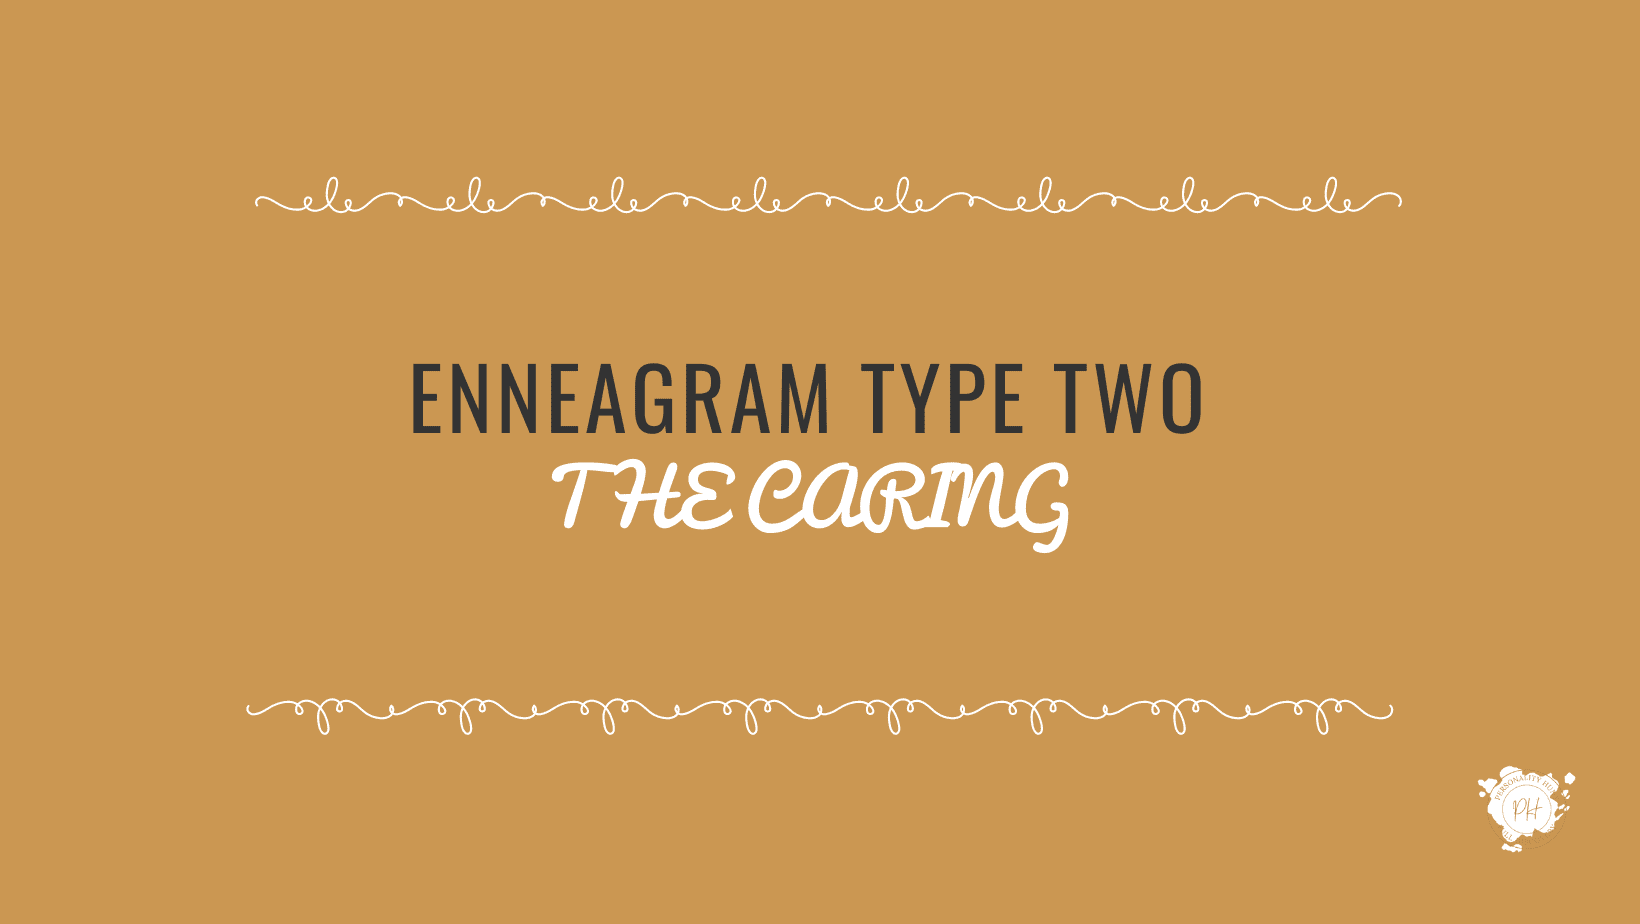 Enneagram Type 2- The Caring